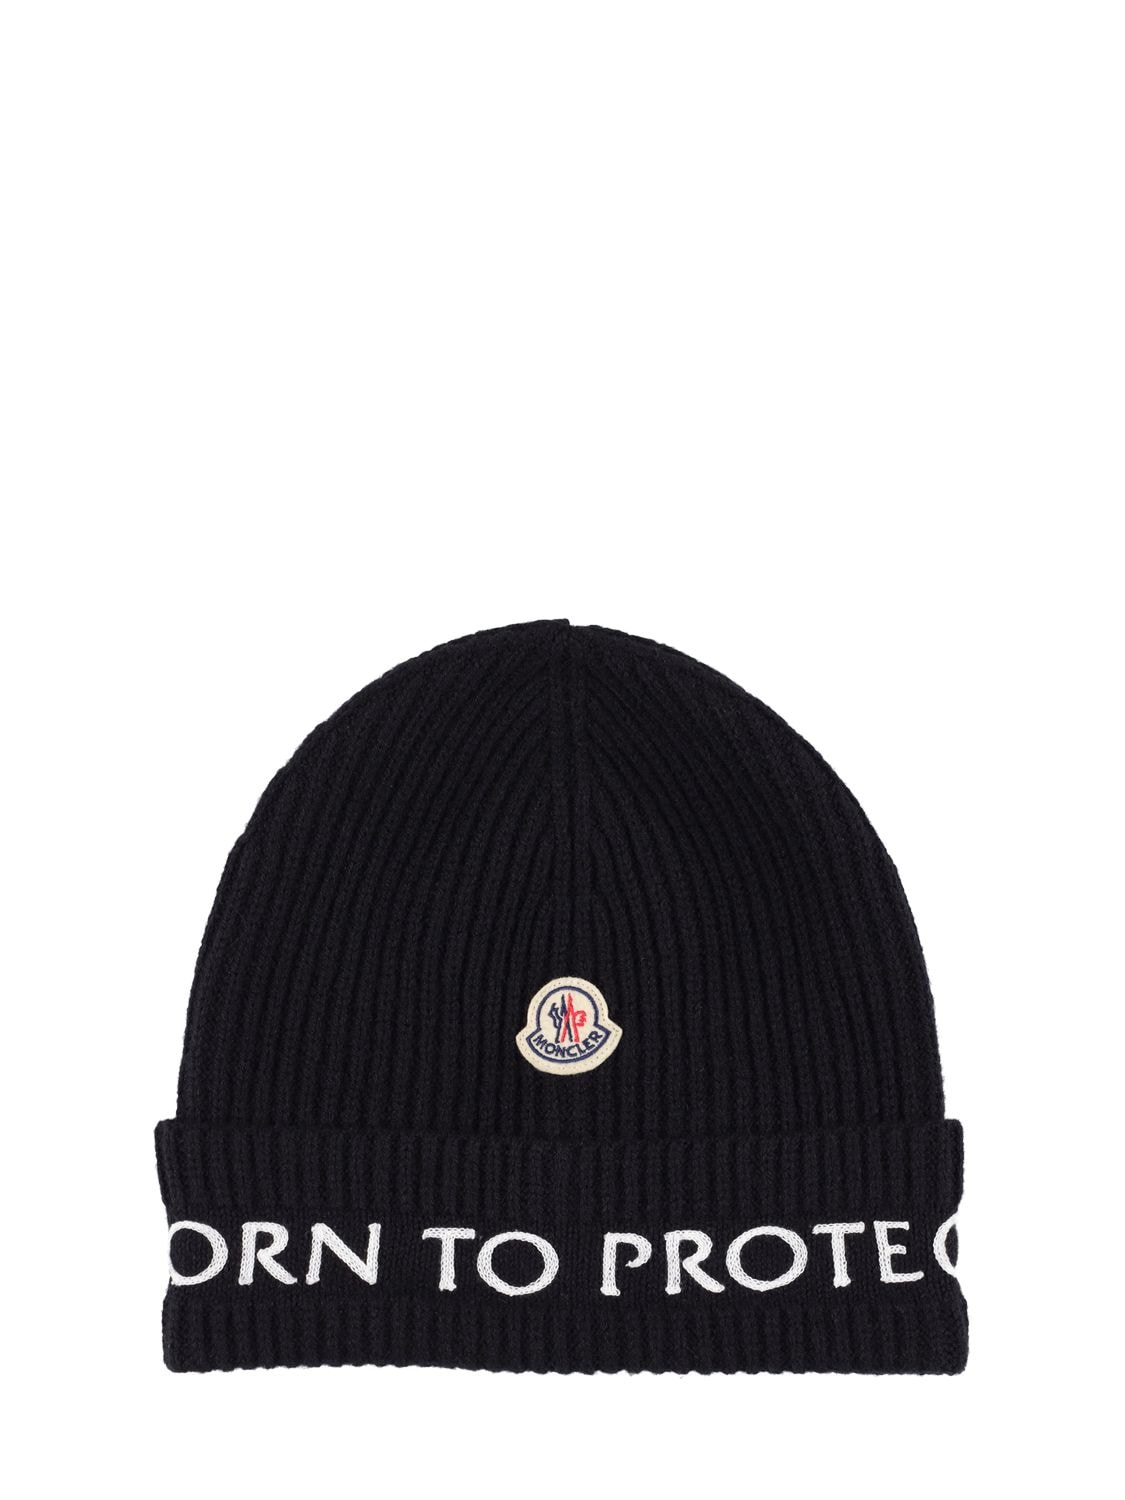 Born To Protect Wool Tricot Beanie